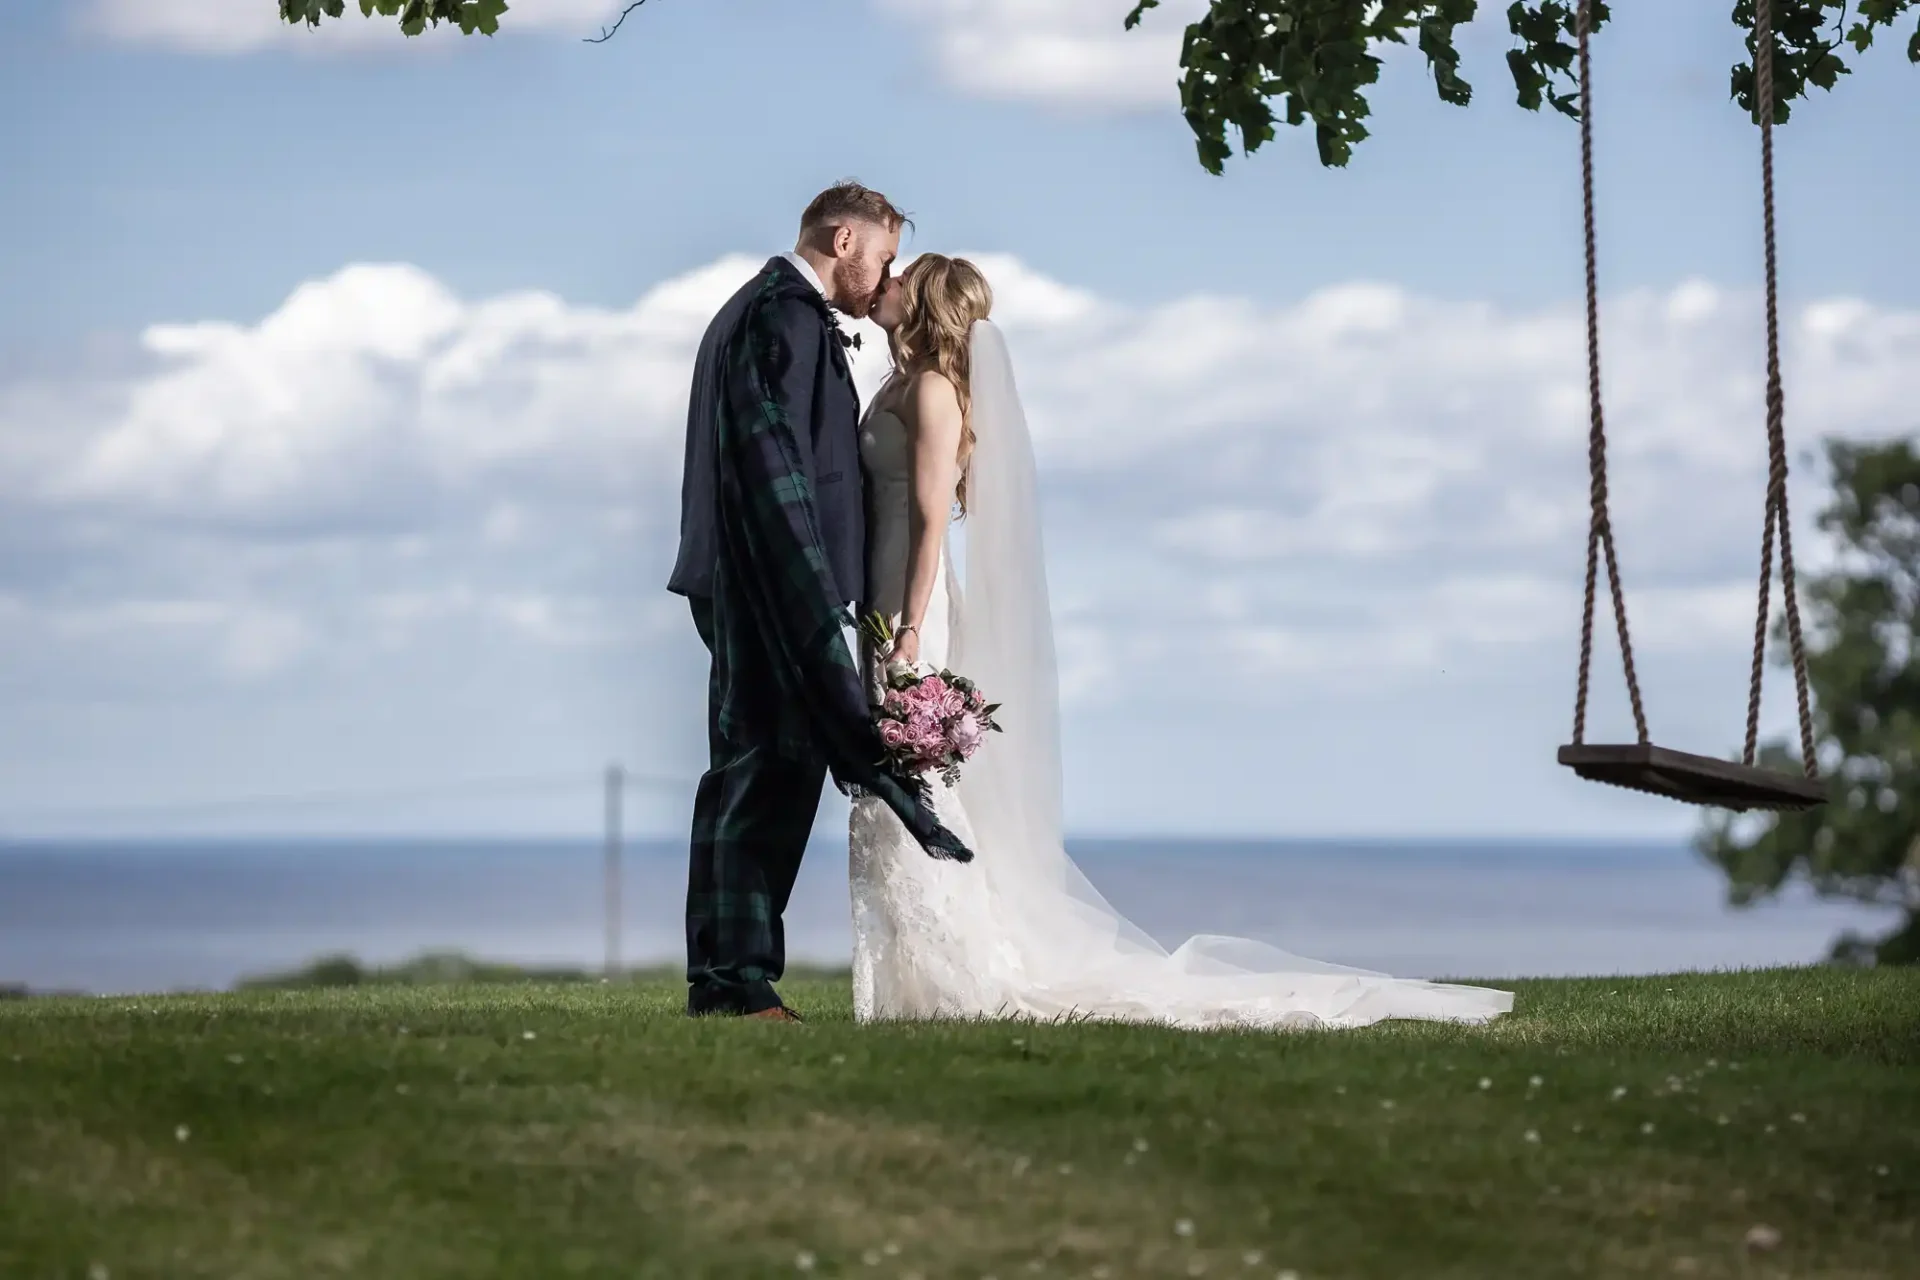 A bride and groom kissing outdoors on a sunny day, with a swing hanging from a tree and a sea backdrop.